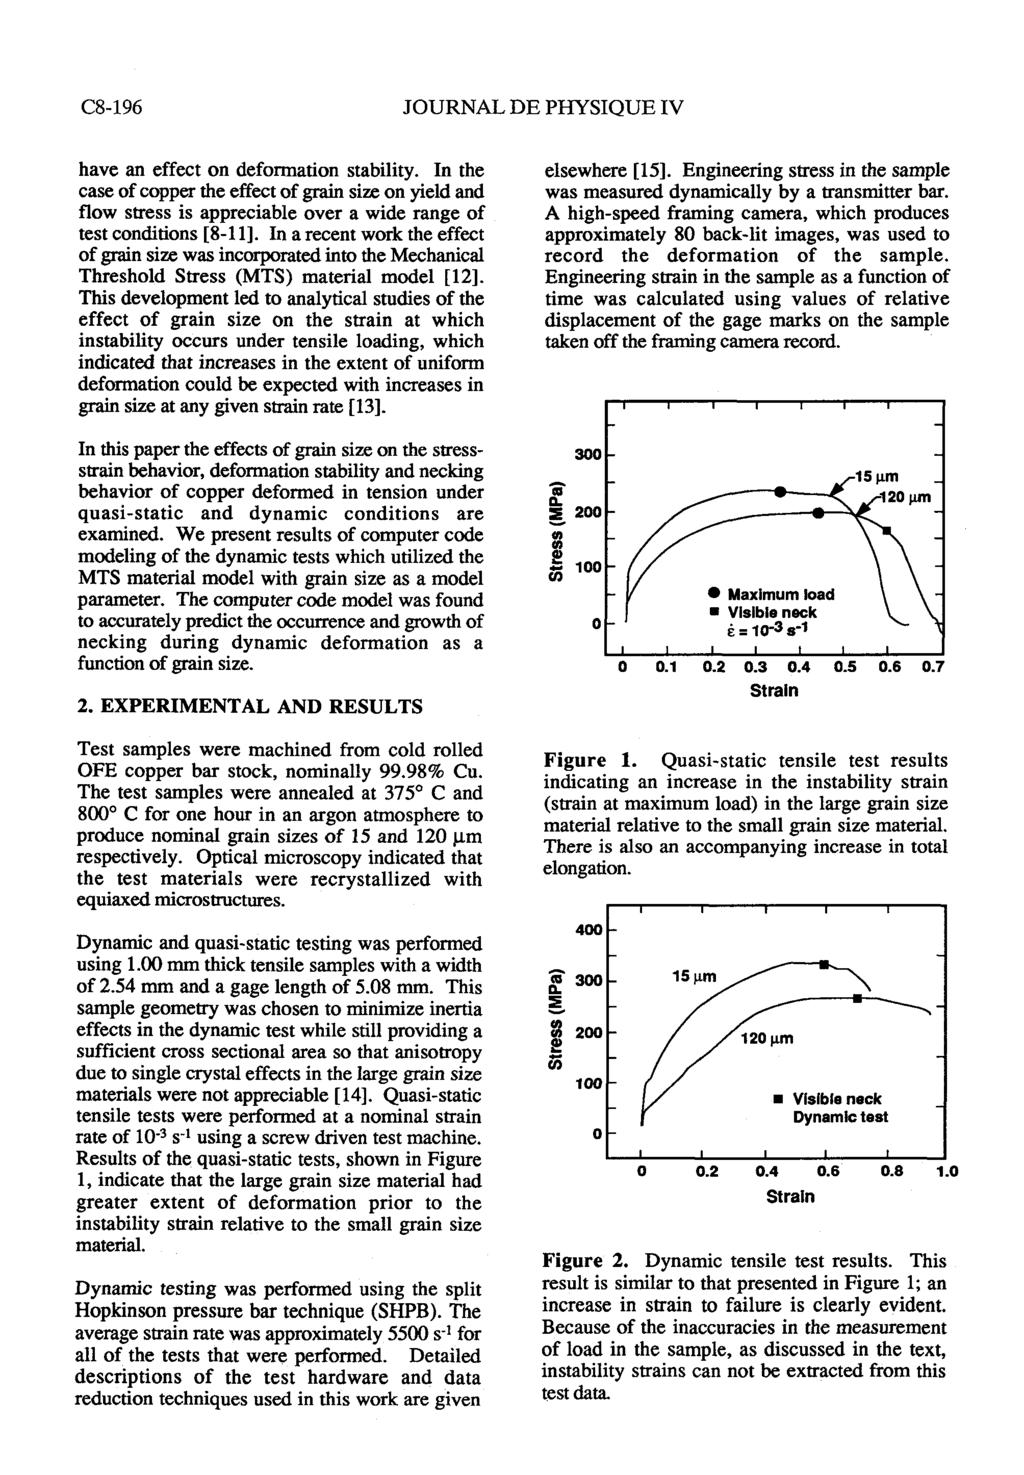 C8196 JOURNAL DE PHYSIQUE IV have an effect on deformation stability.